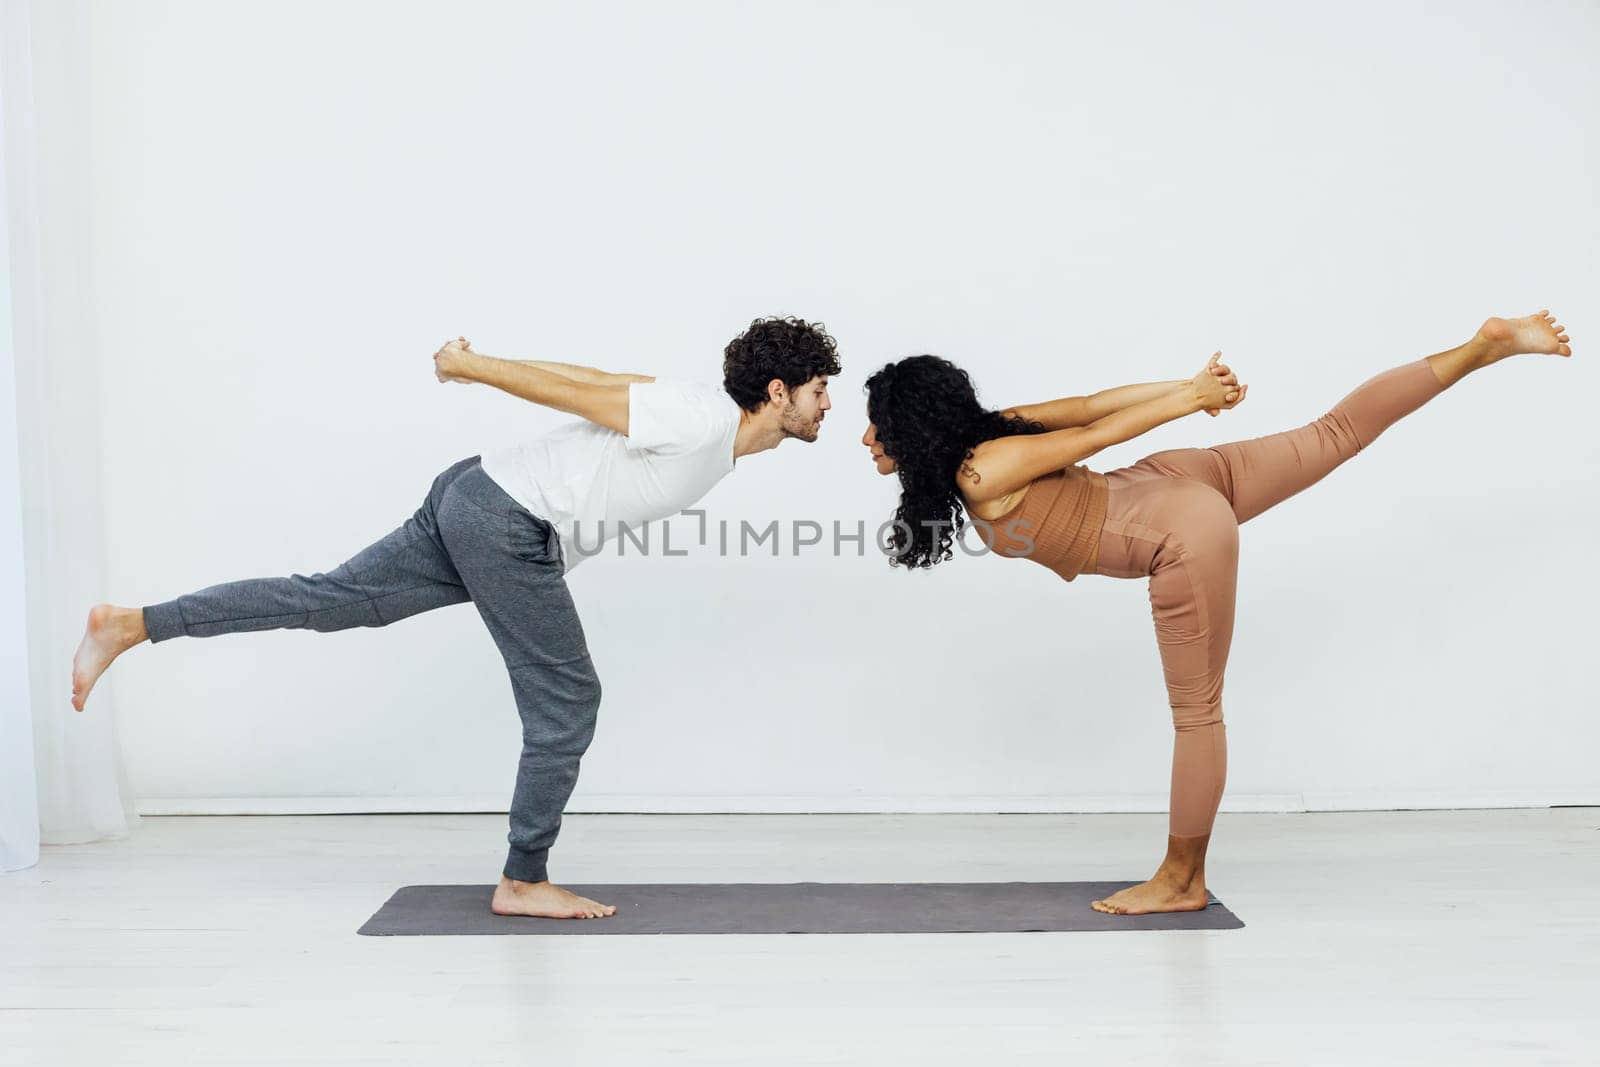 a man and woman engage in yoga training aerobics stretching